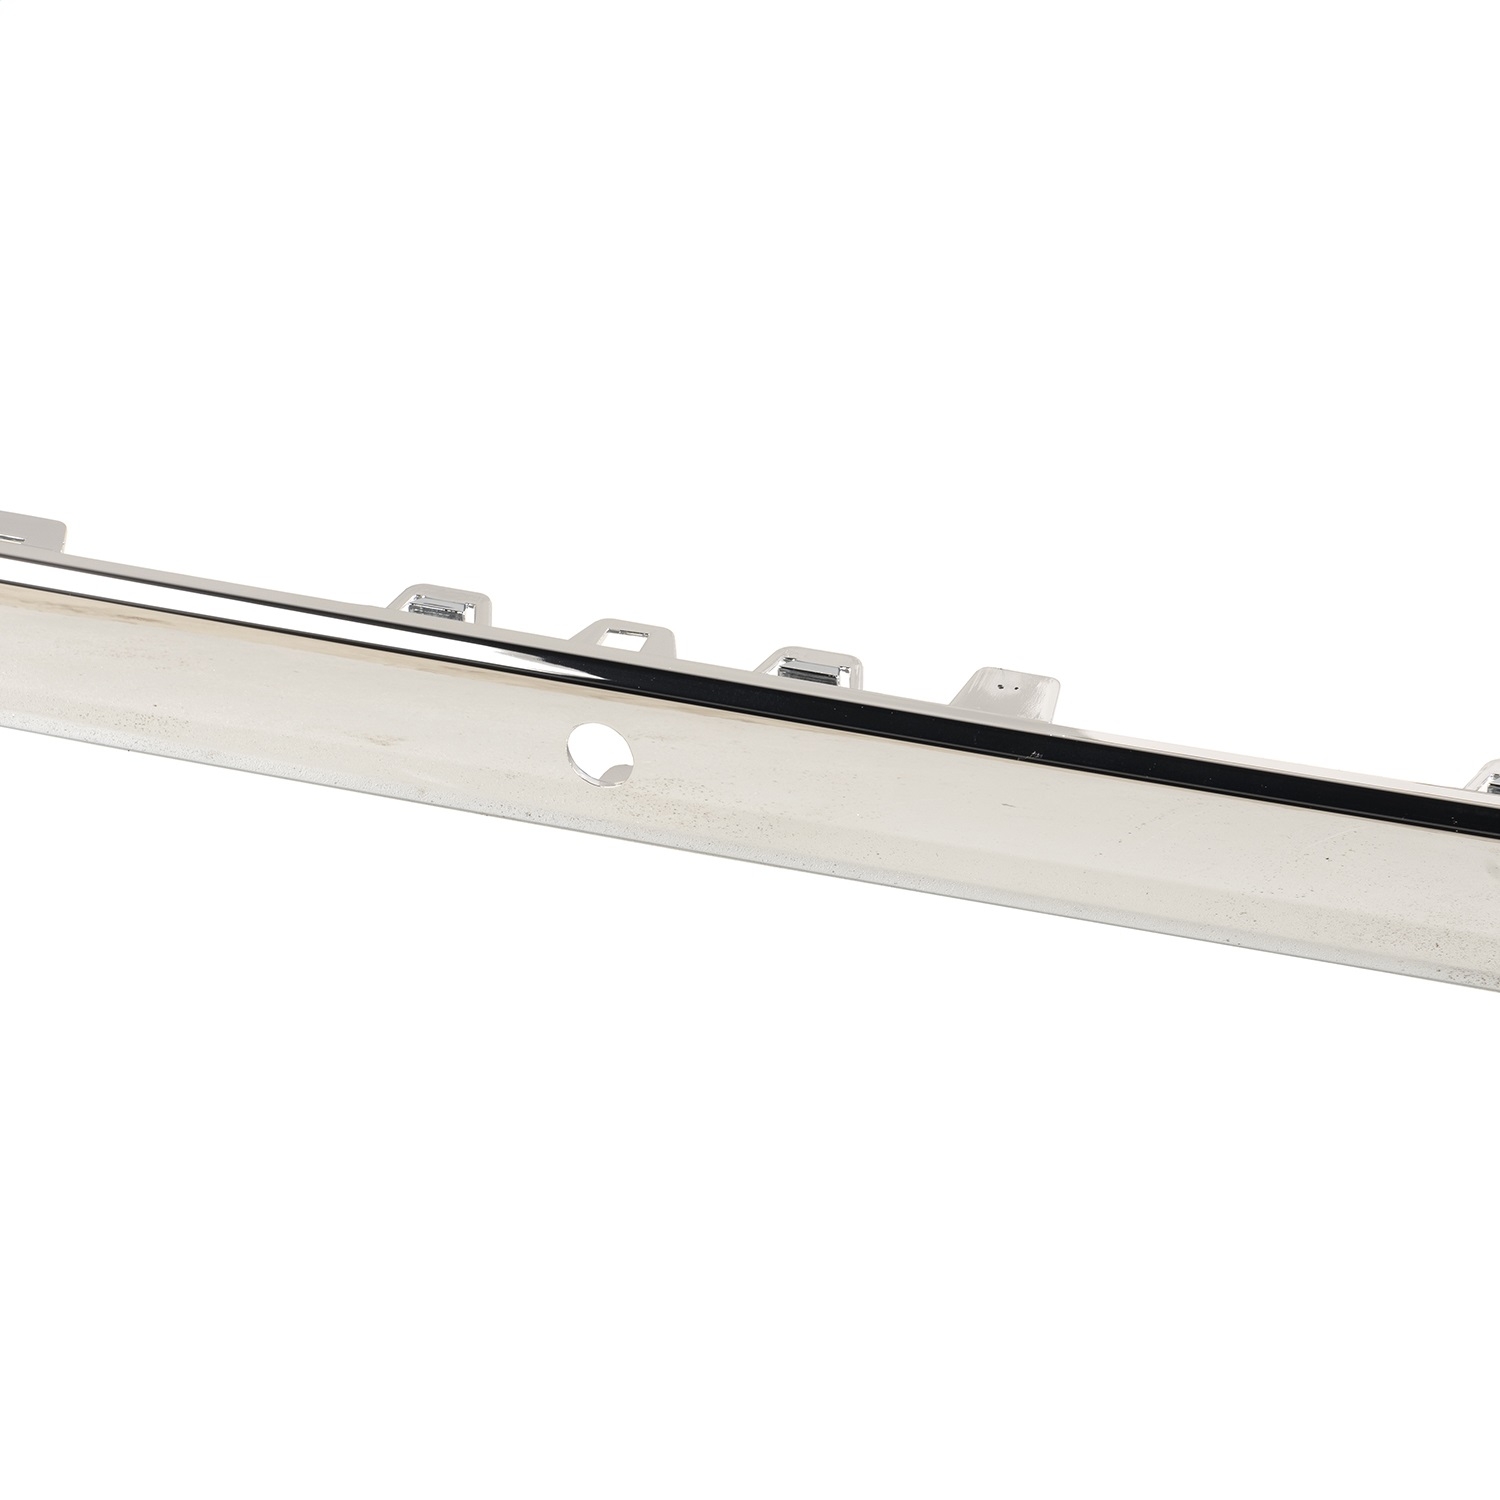 Jeep Omix This Rear Chrome Bumper Trim From Omix Includes The Parking Holes And Fits 05-10 Grand